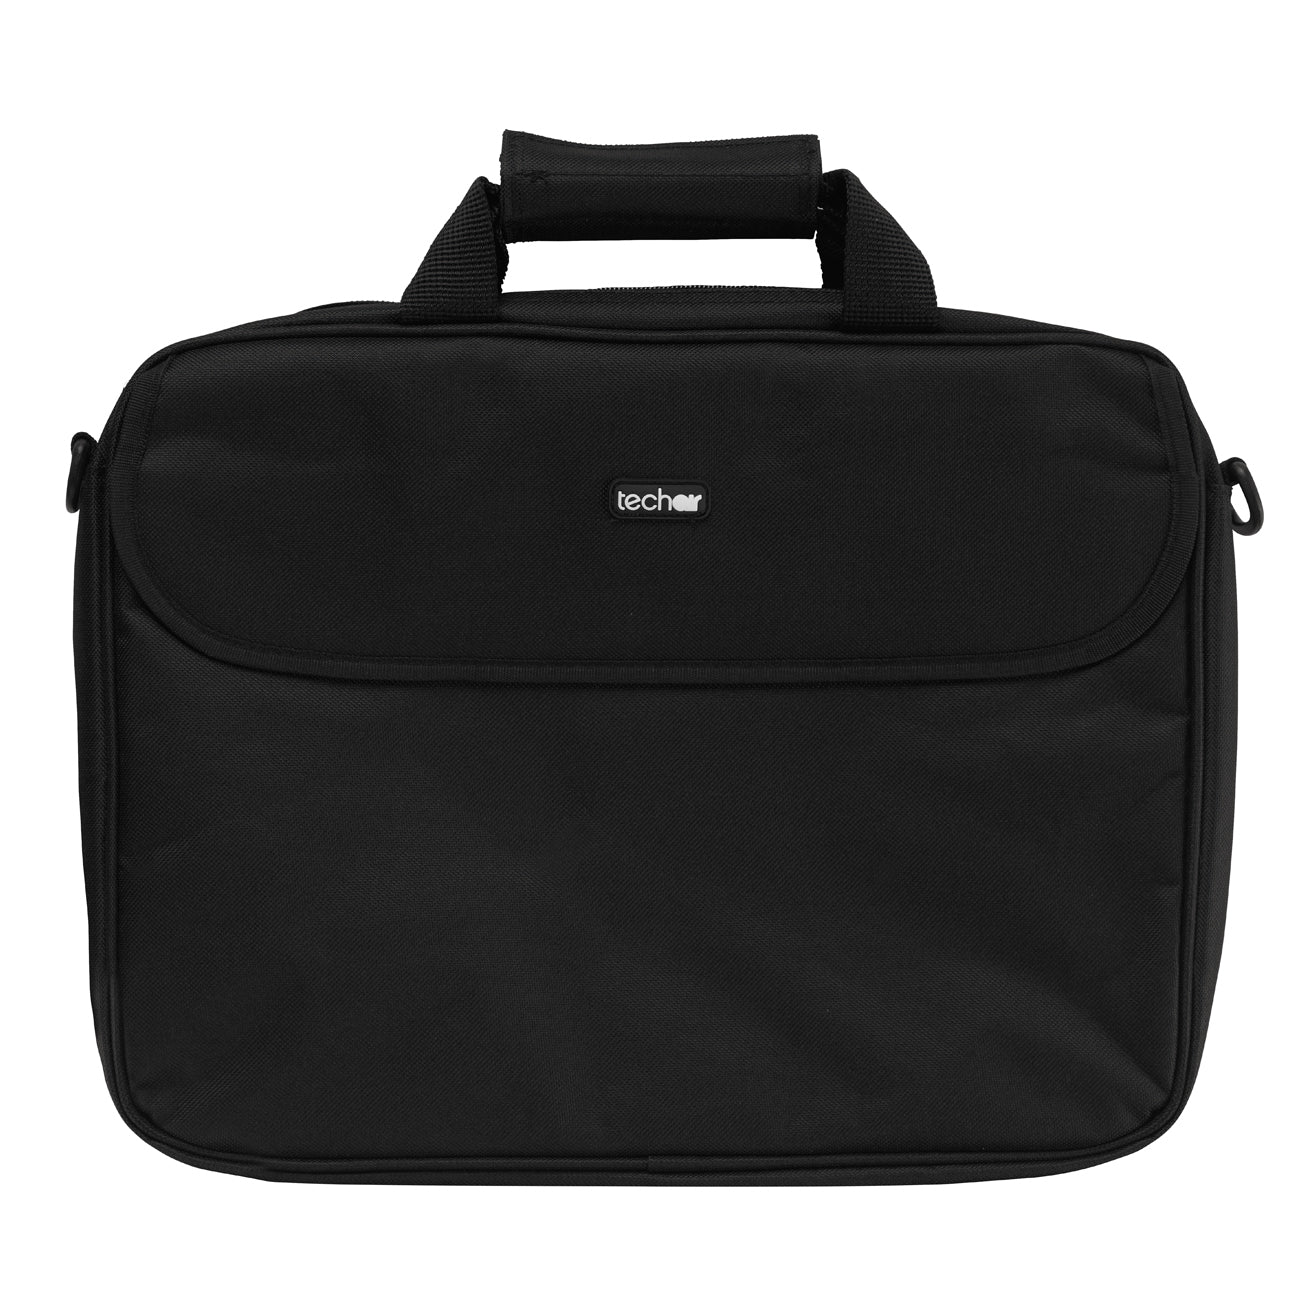 Techair - Notebook carrying case - 10" - 11.6" - black